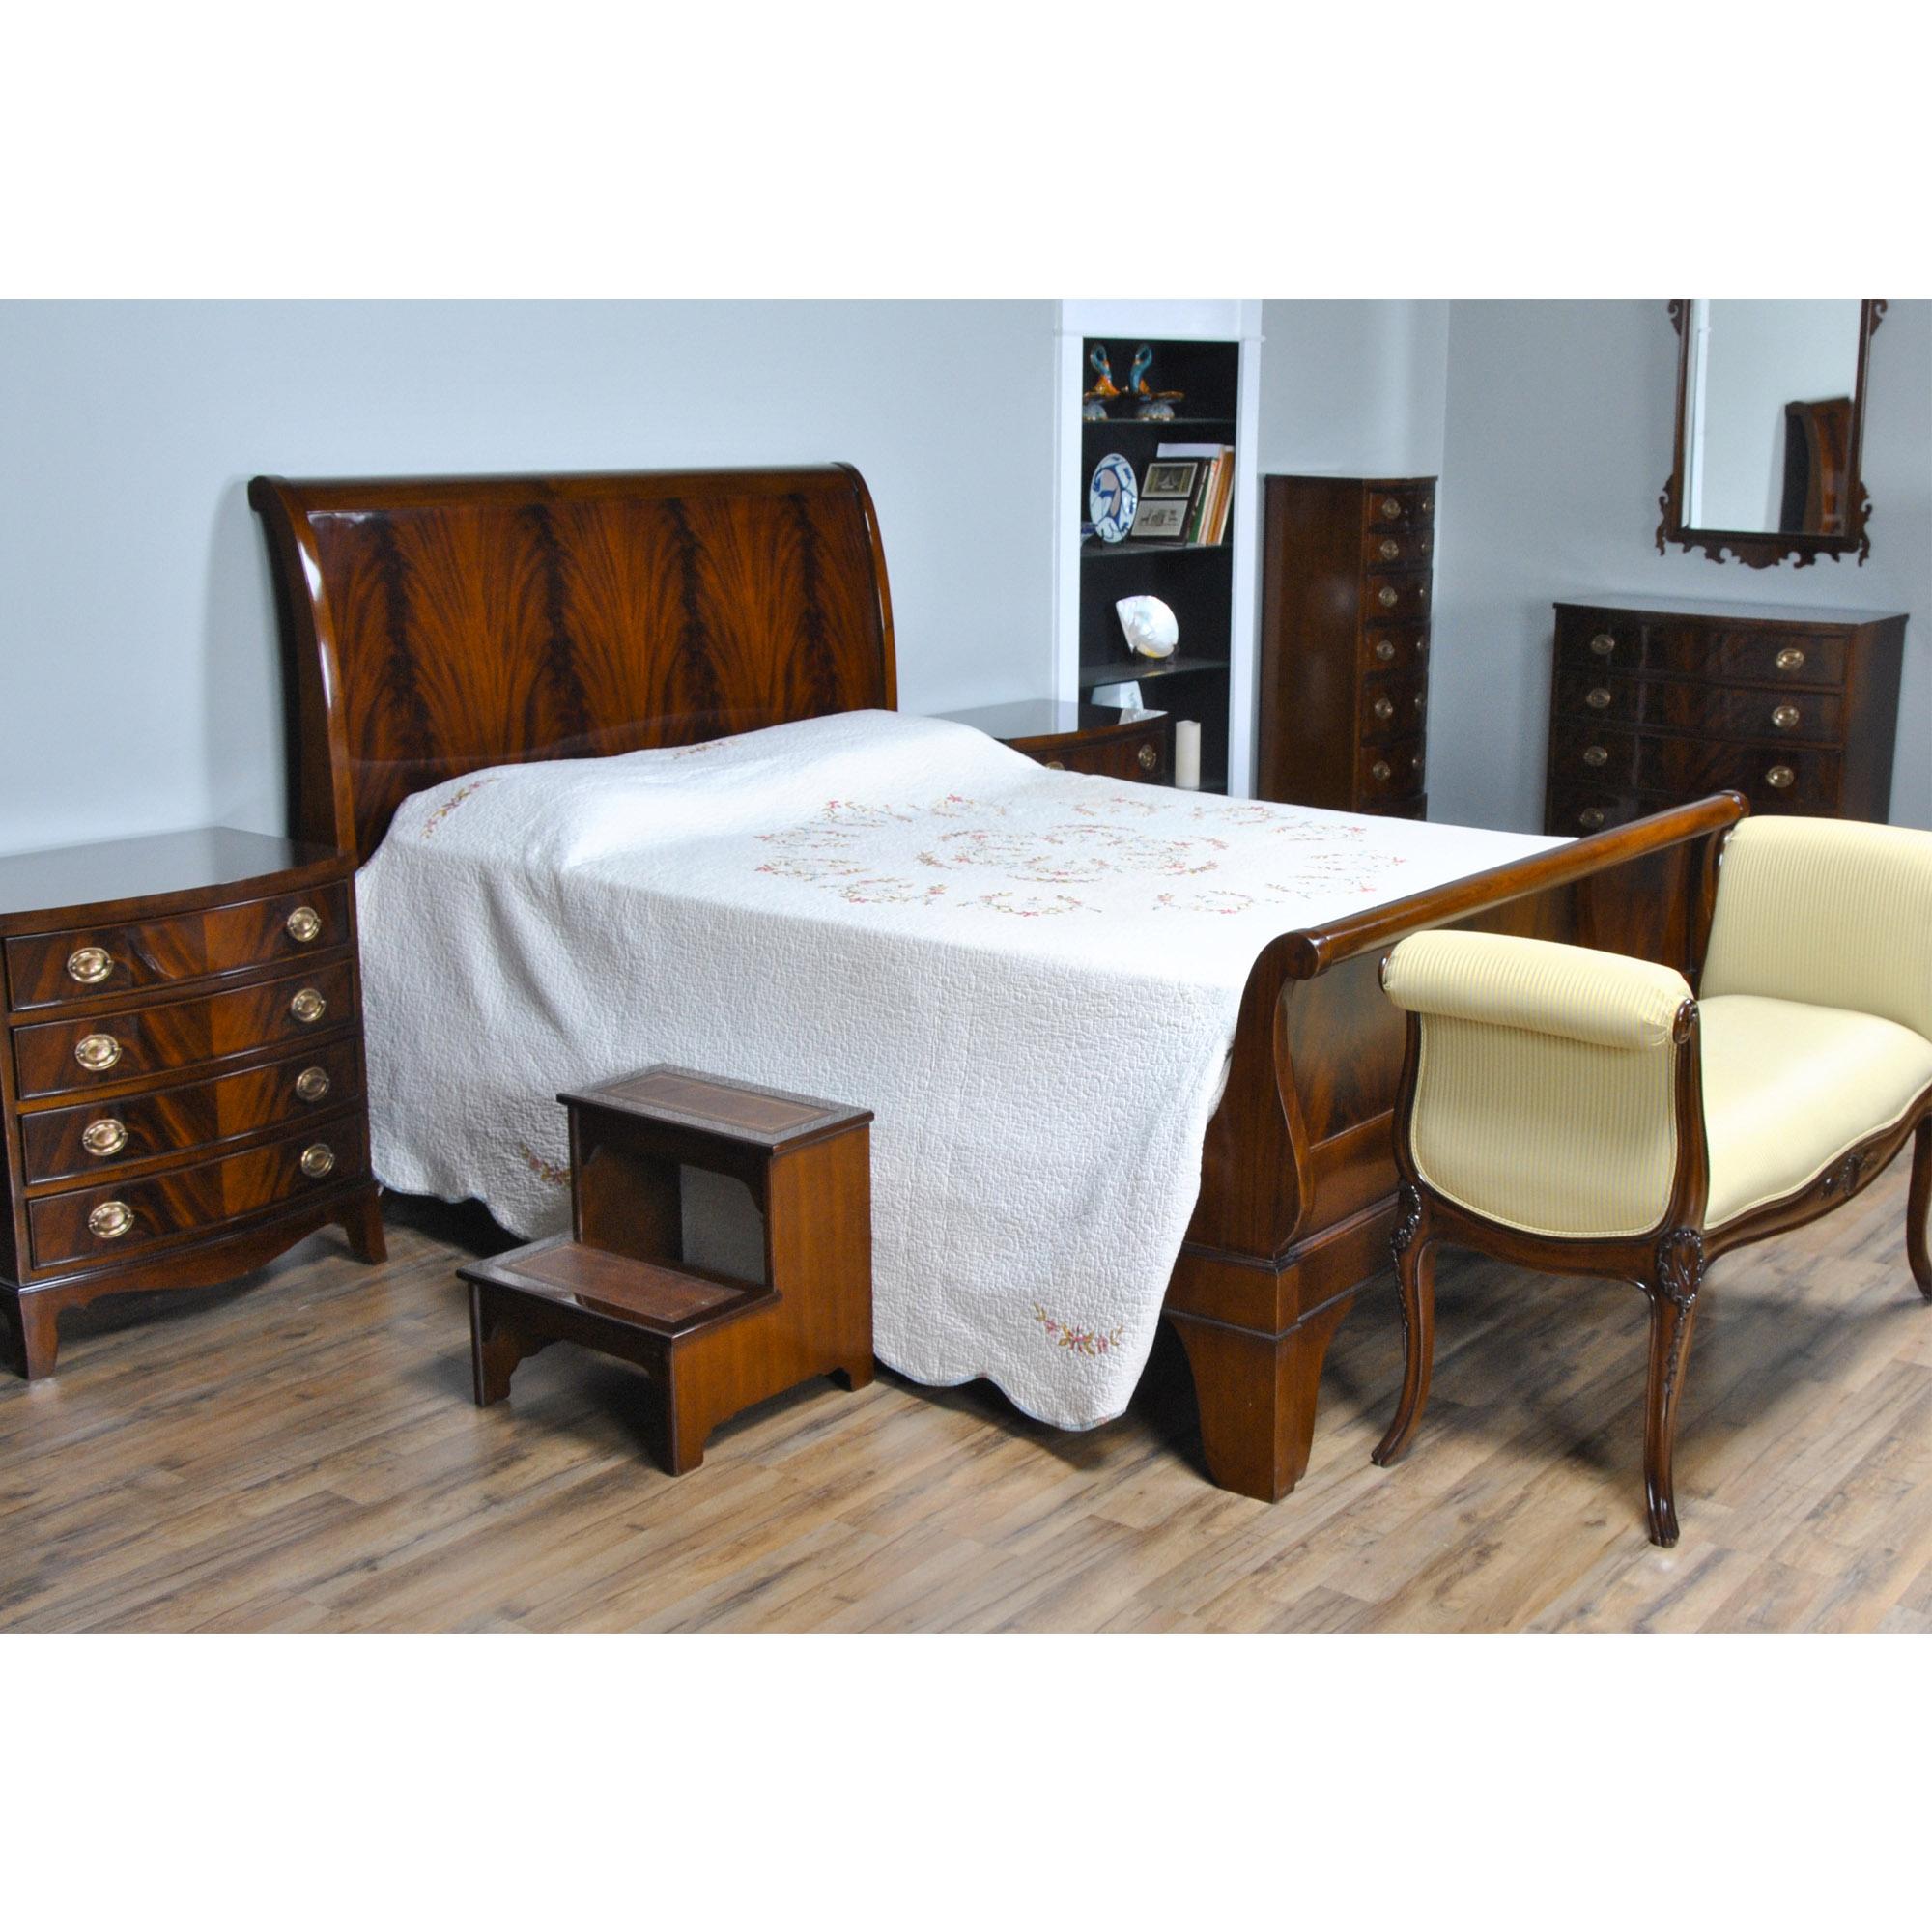 Great Quality Mahogany King Size Sleigh Bed features a solid mahogany frame along with the finest quality veneered panels which combine to form a sleek and elegant design. Also known as a platform bed this item comes with fit plywood to support your